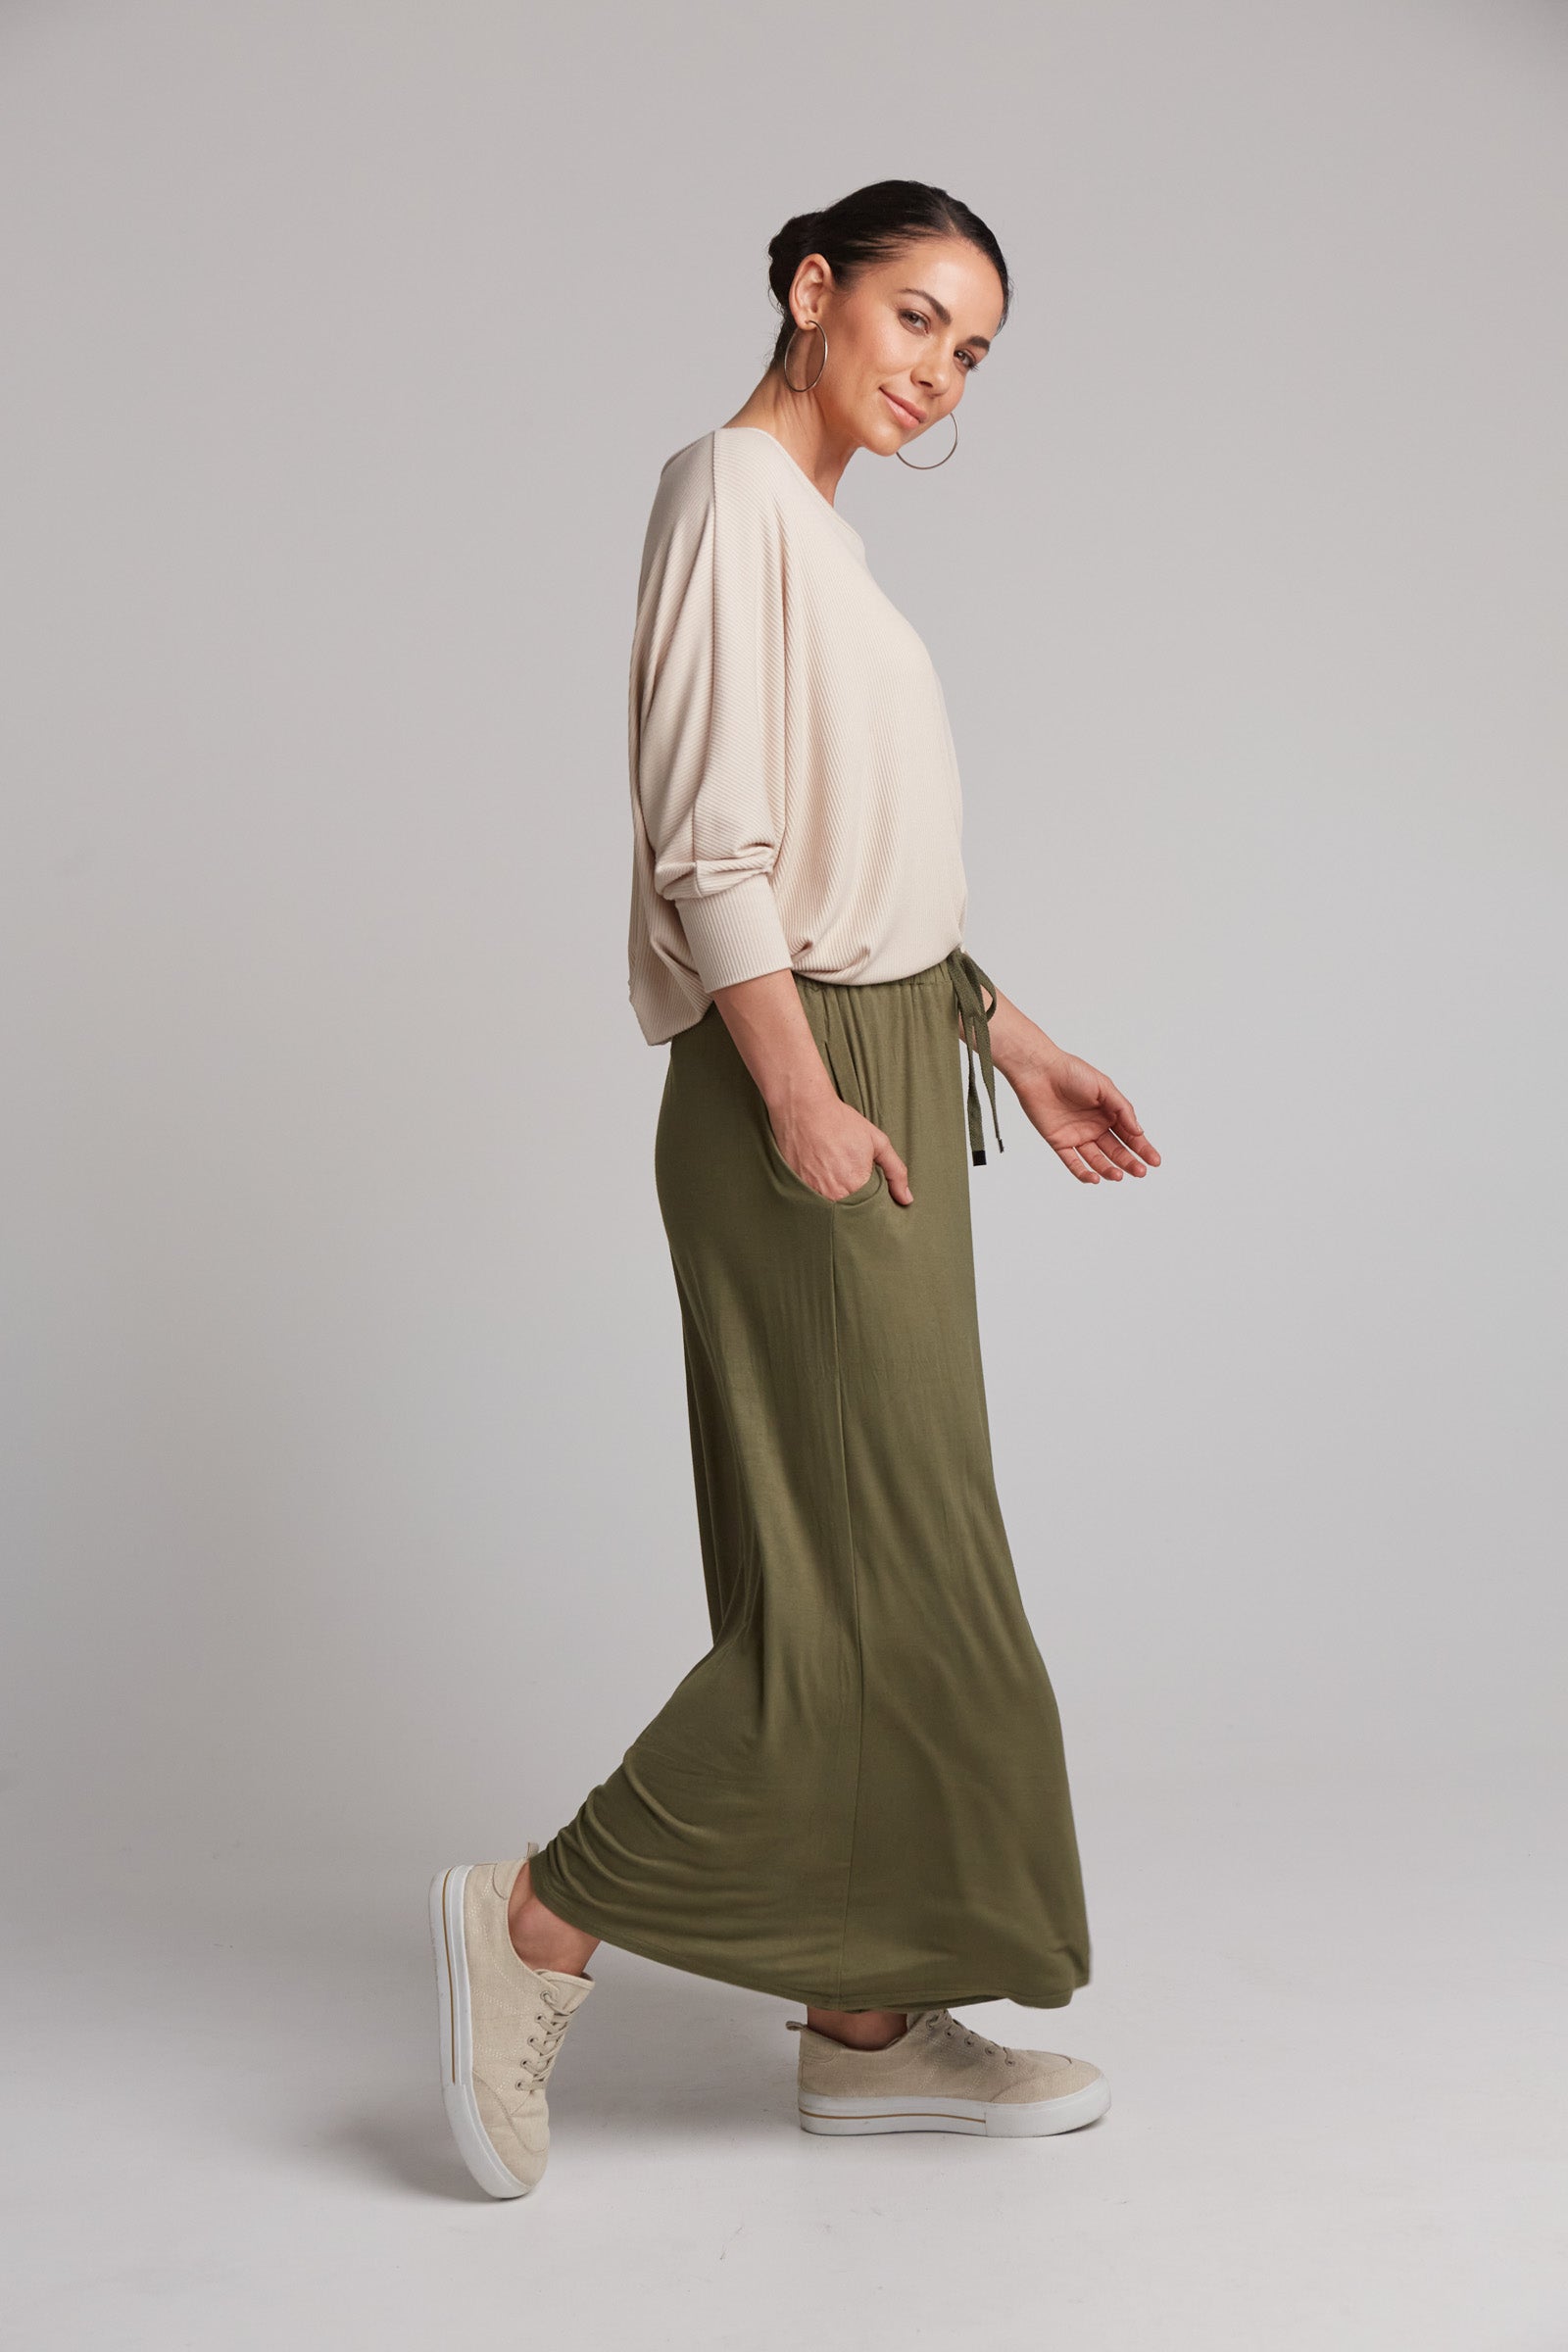 Studio Jersey Tie Pant - Fern - eb&ive Clothing - Pant Relaxed Jersey